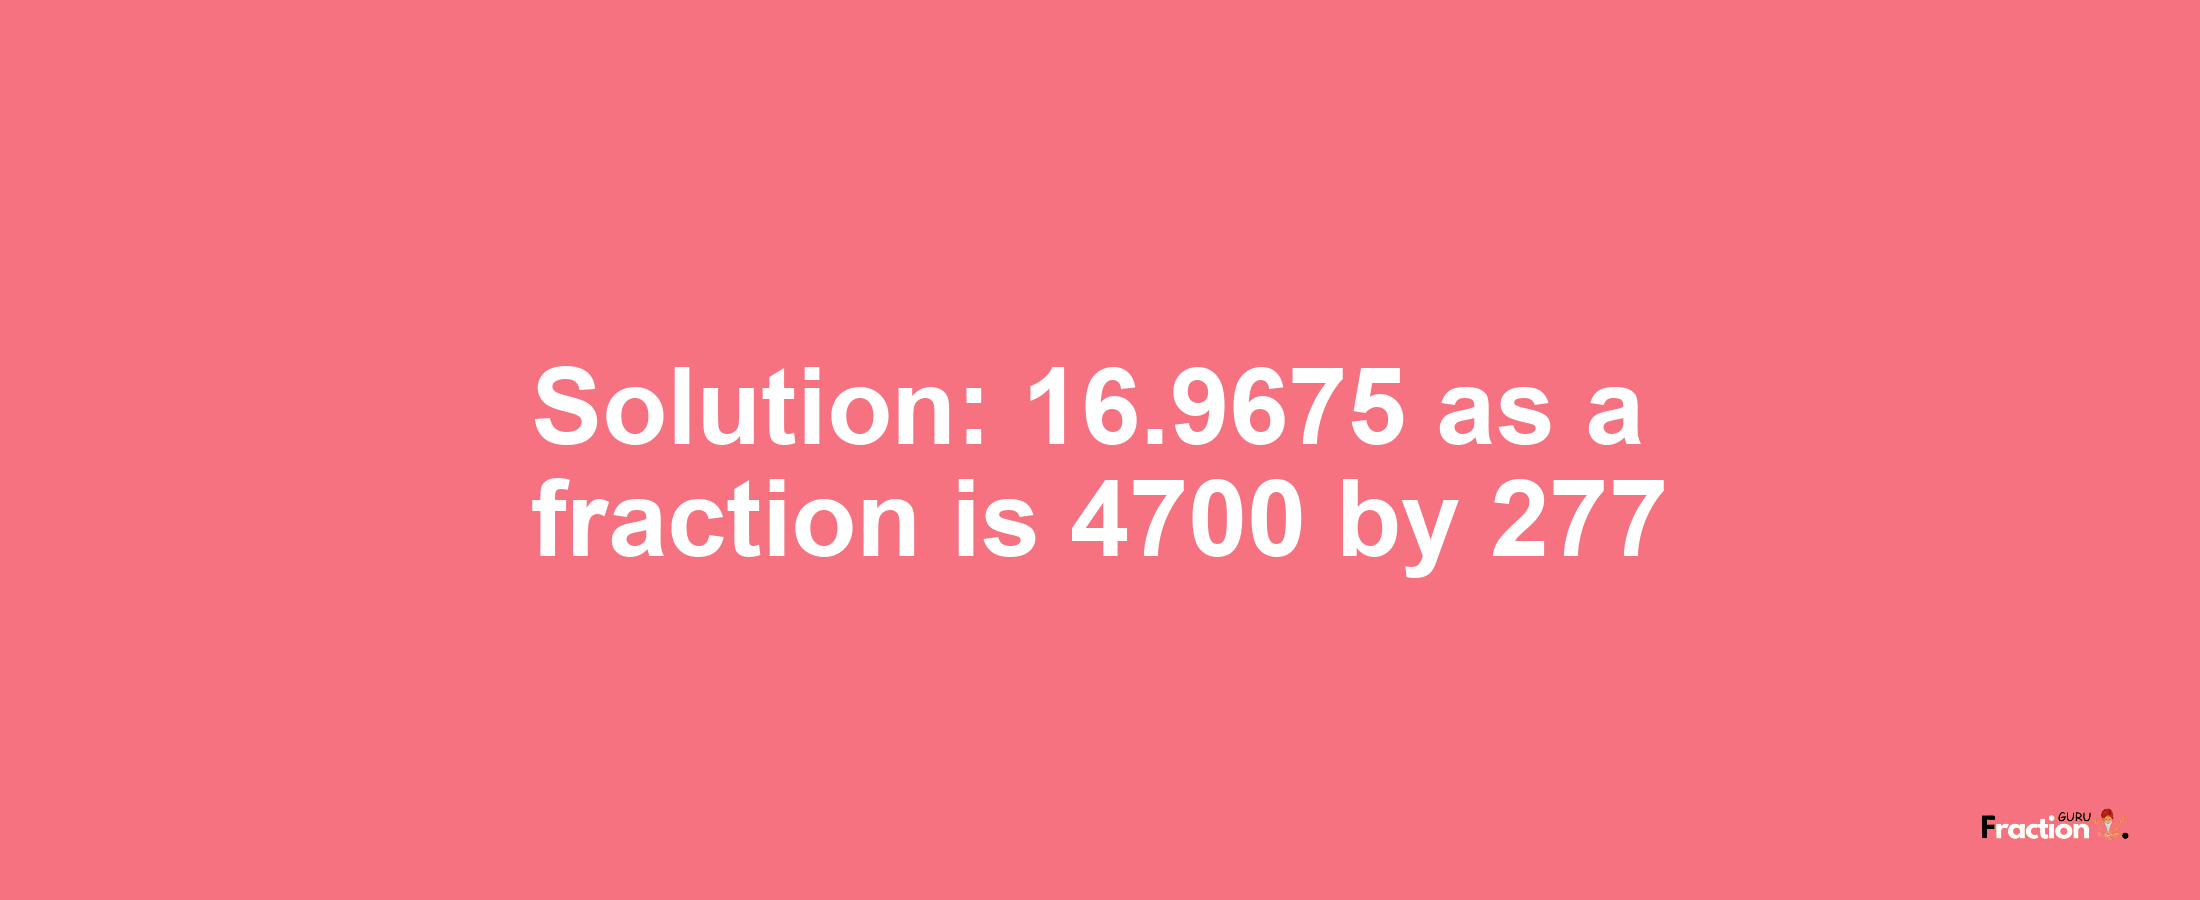 Solution:16.9675 as a fraction is 4700/277